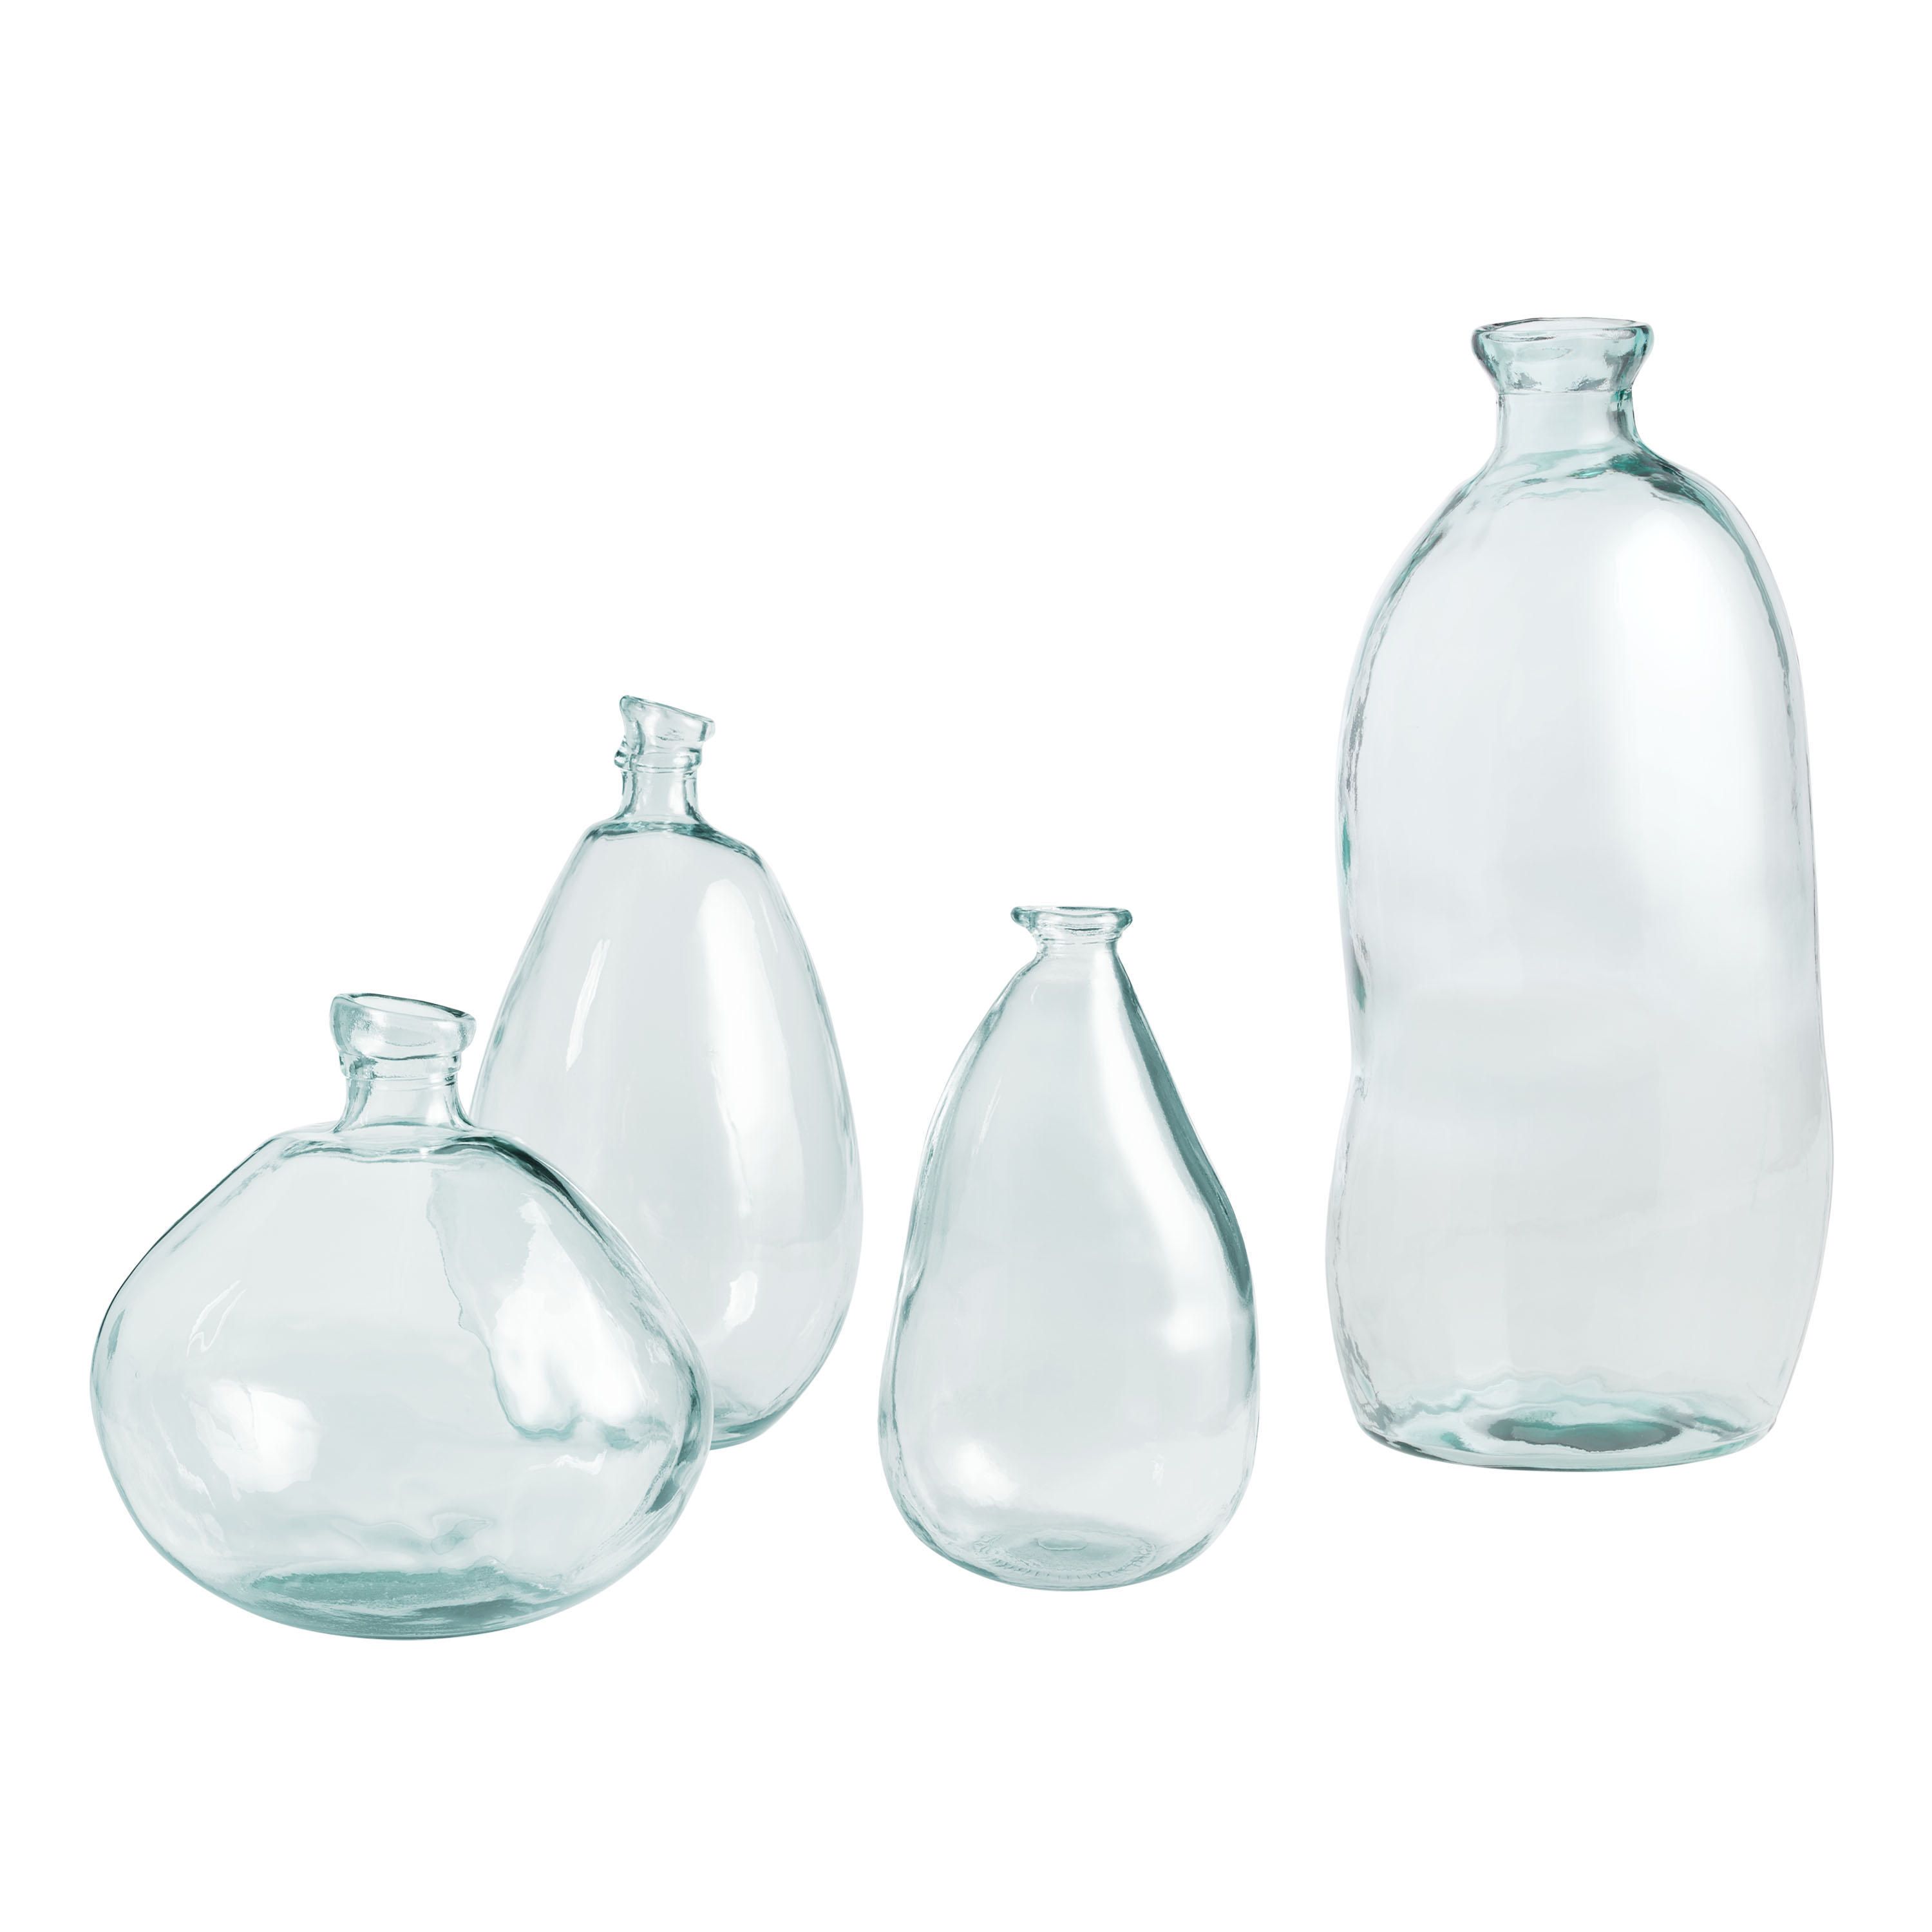 Barcelona Clear Recycled Glass Vase | World Market